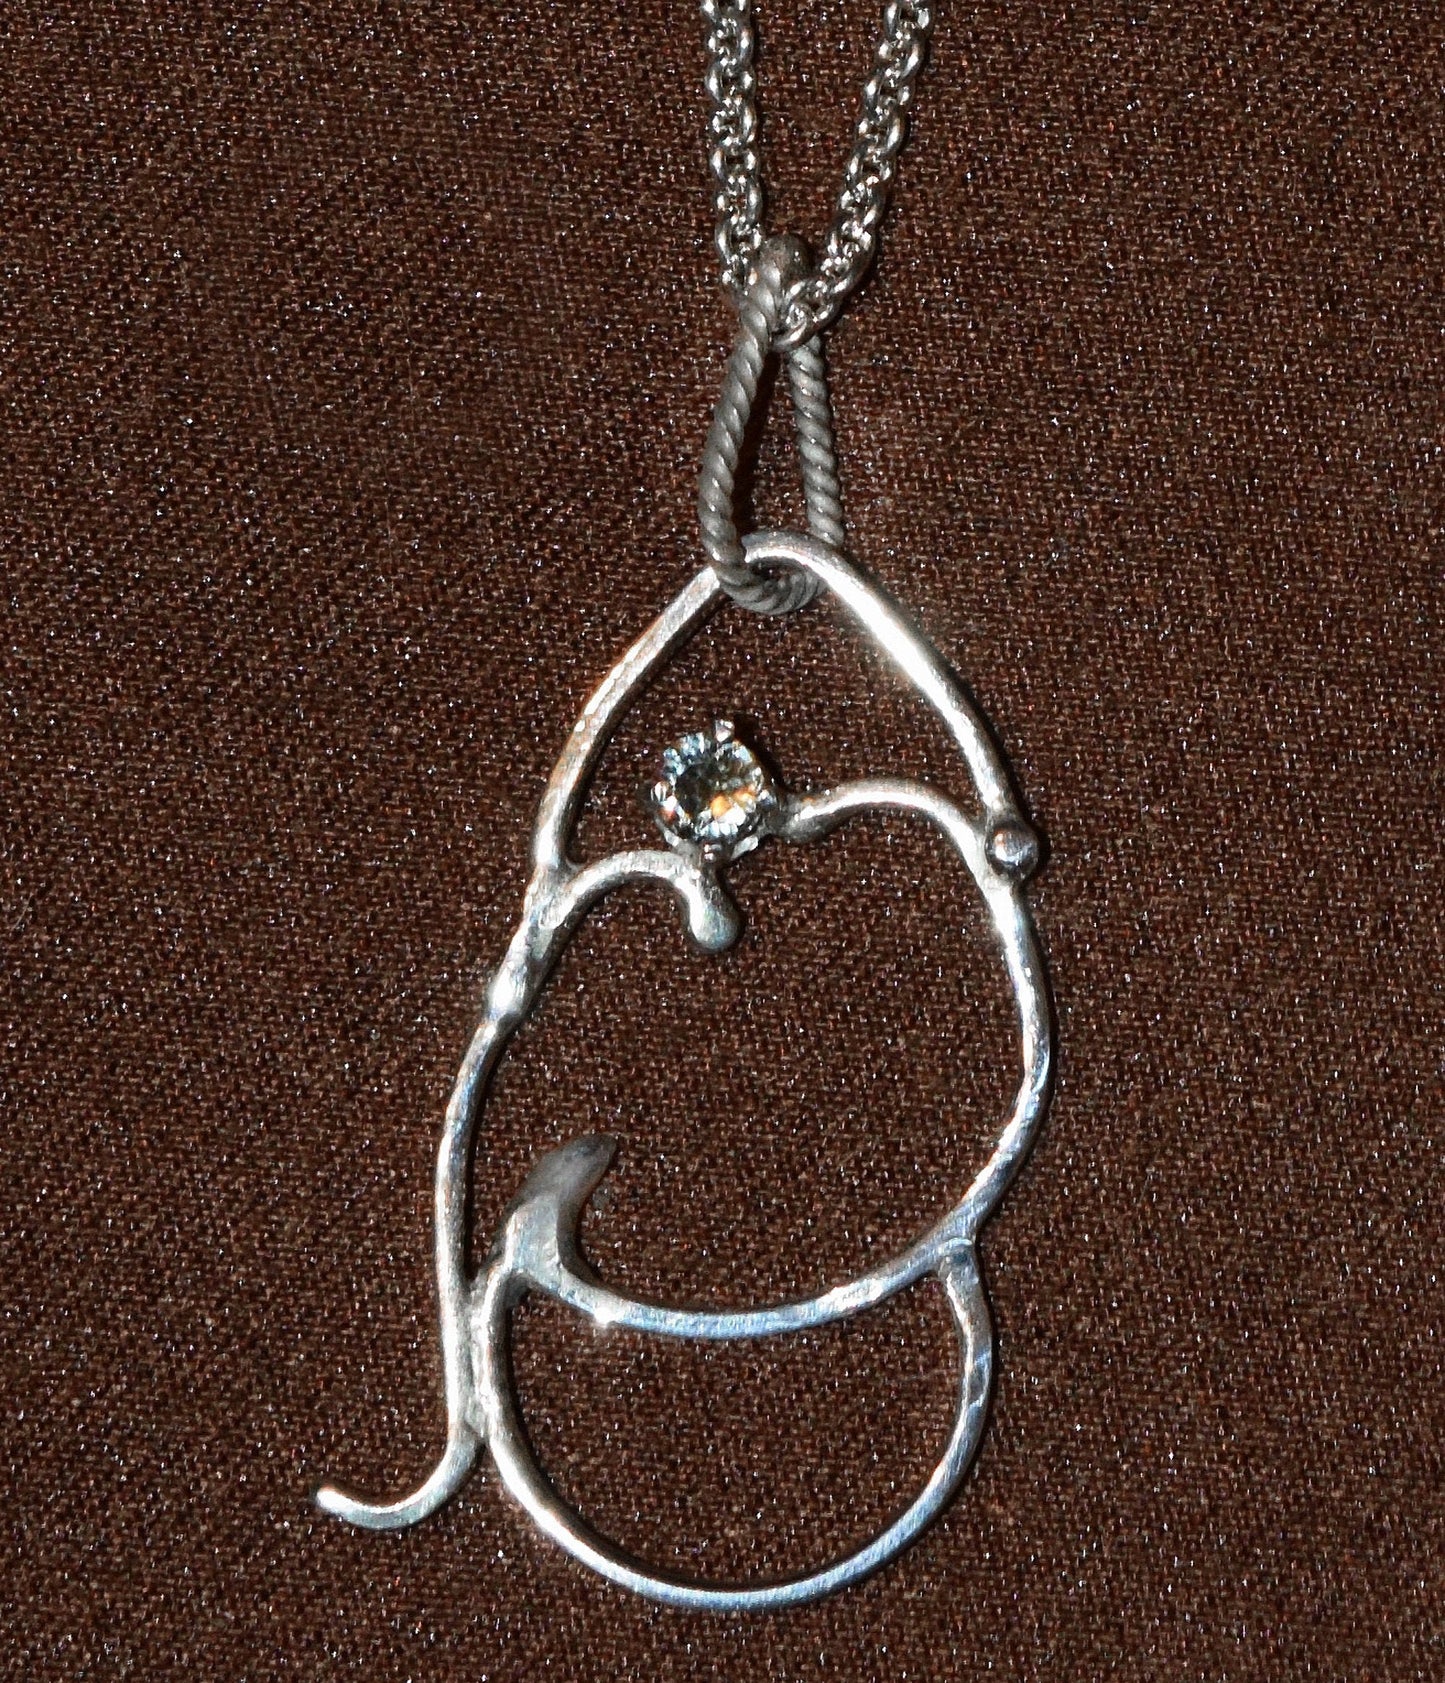 Handcrafted Sterling Silver pendant featuring a rare, polychrome Tanzanian Sapphire. Includes a 18-inch Sterling necklace.